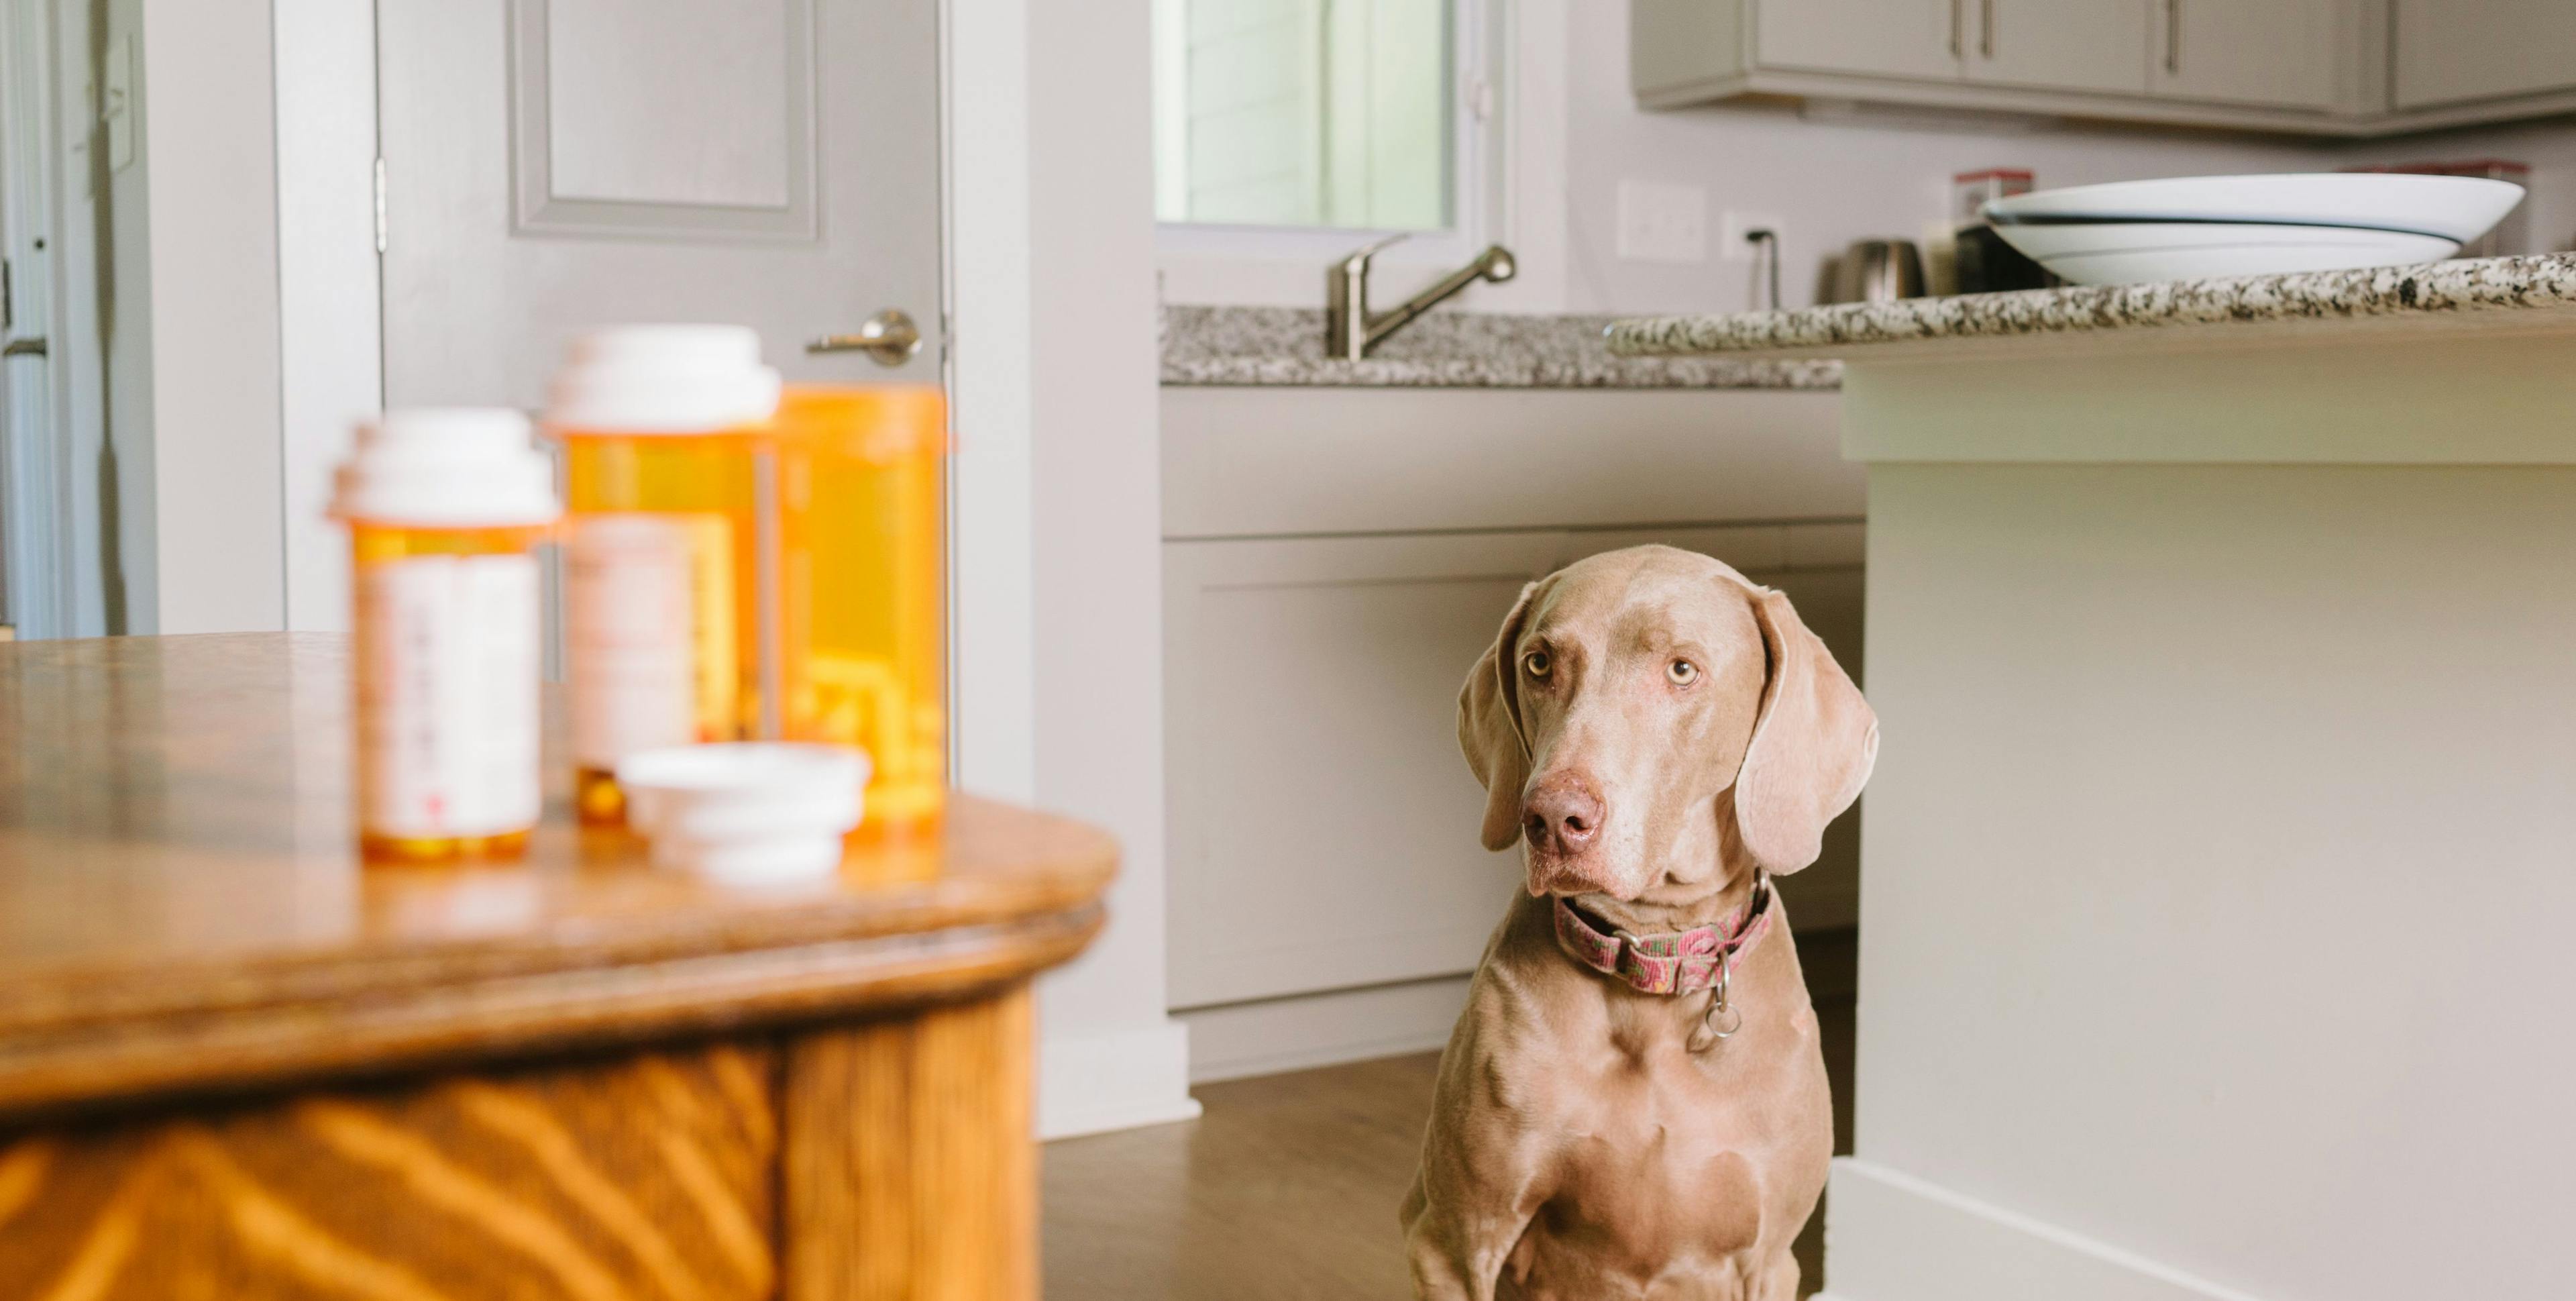 Psychotropic substances are poisoning pets